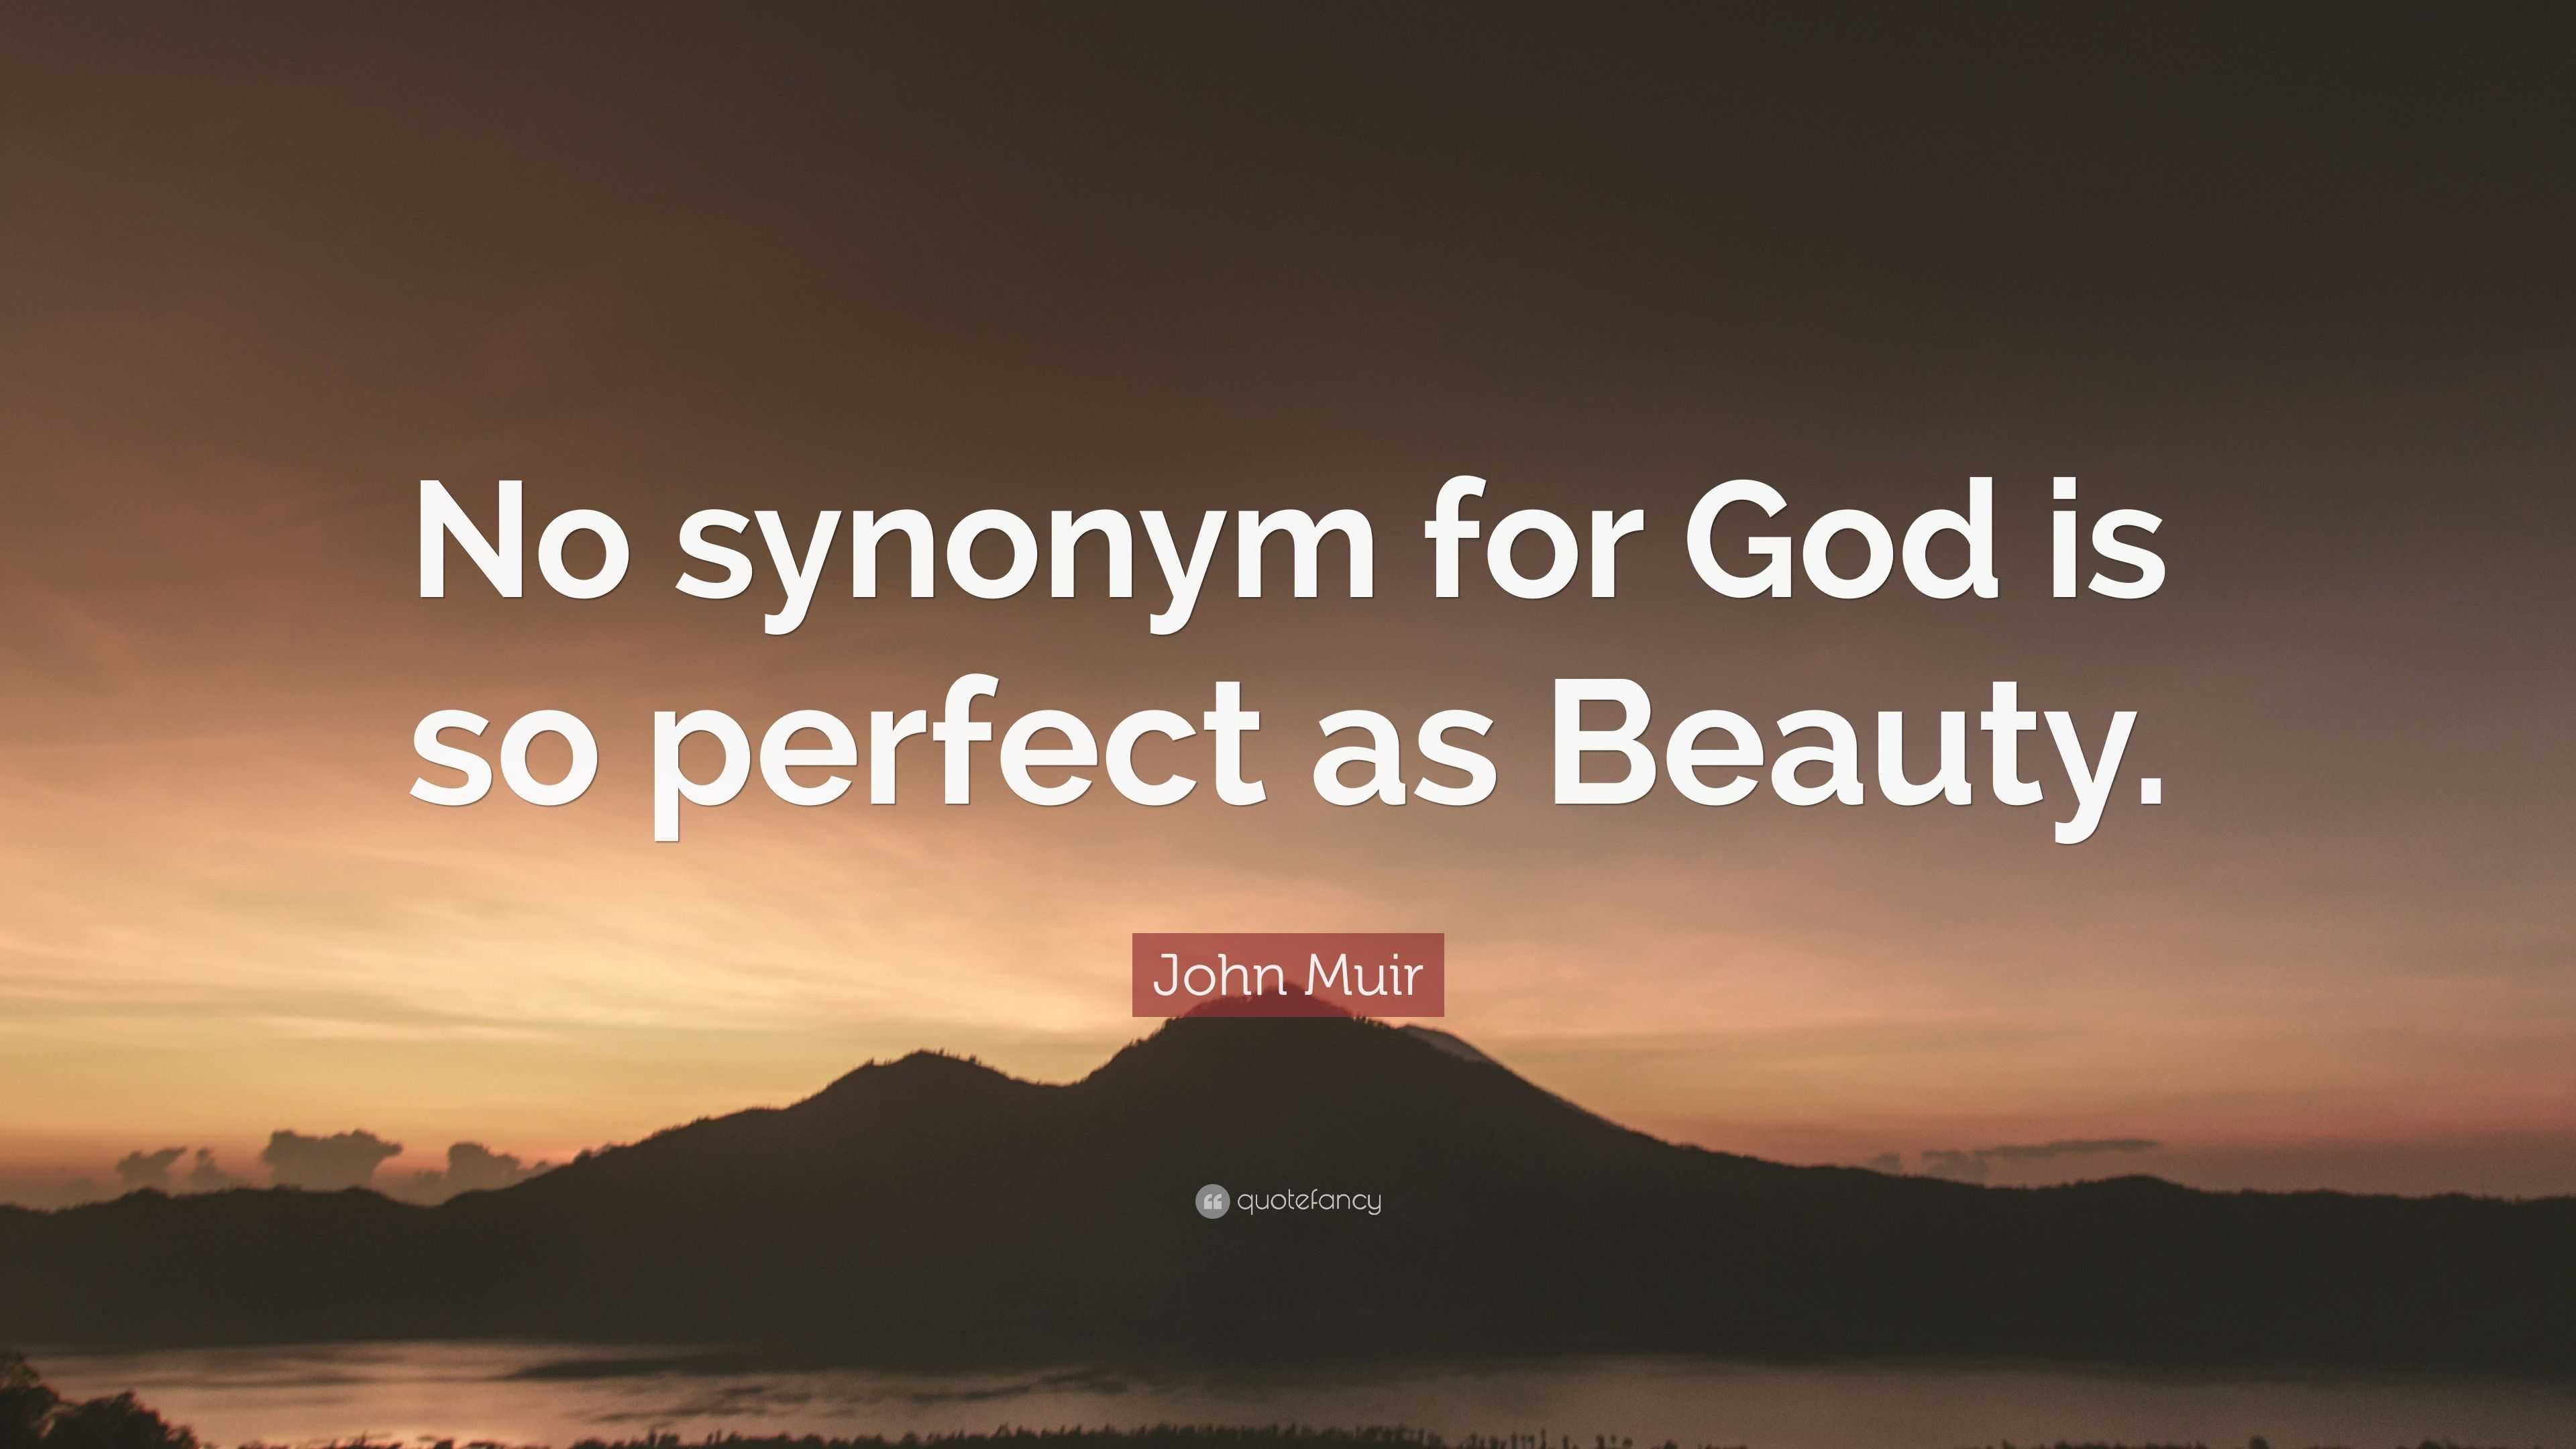 2740680 John Muir Quote No synonym for God is so perfect as Beauty